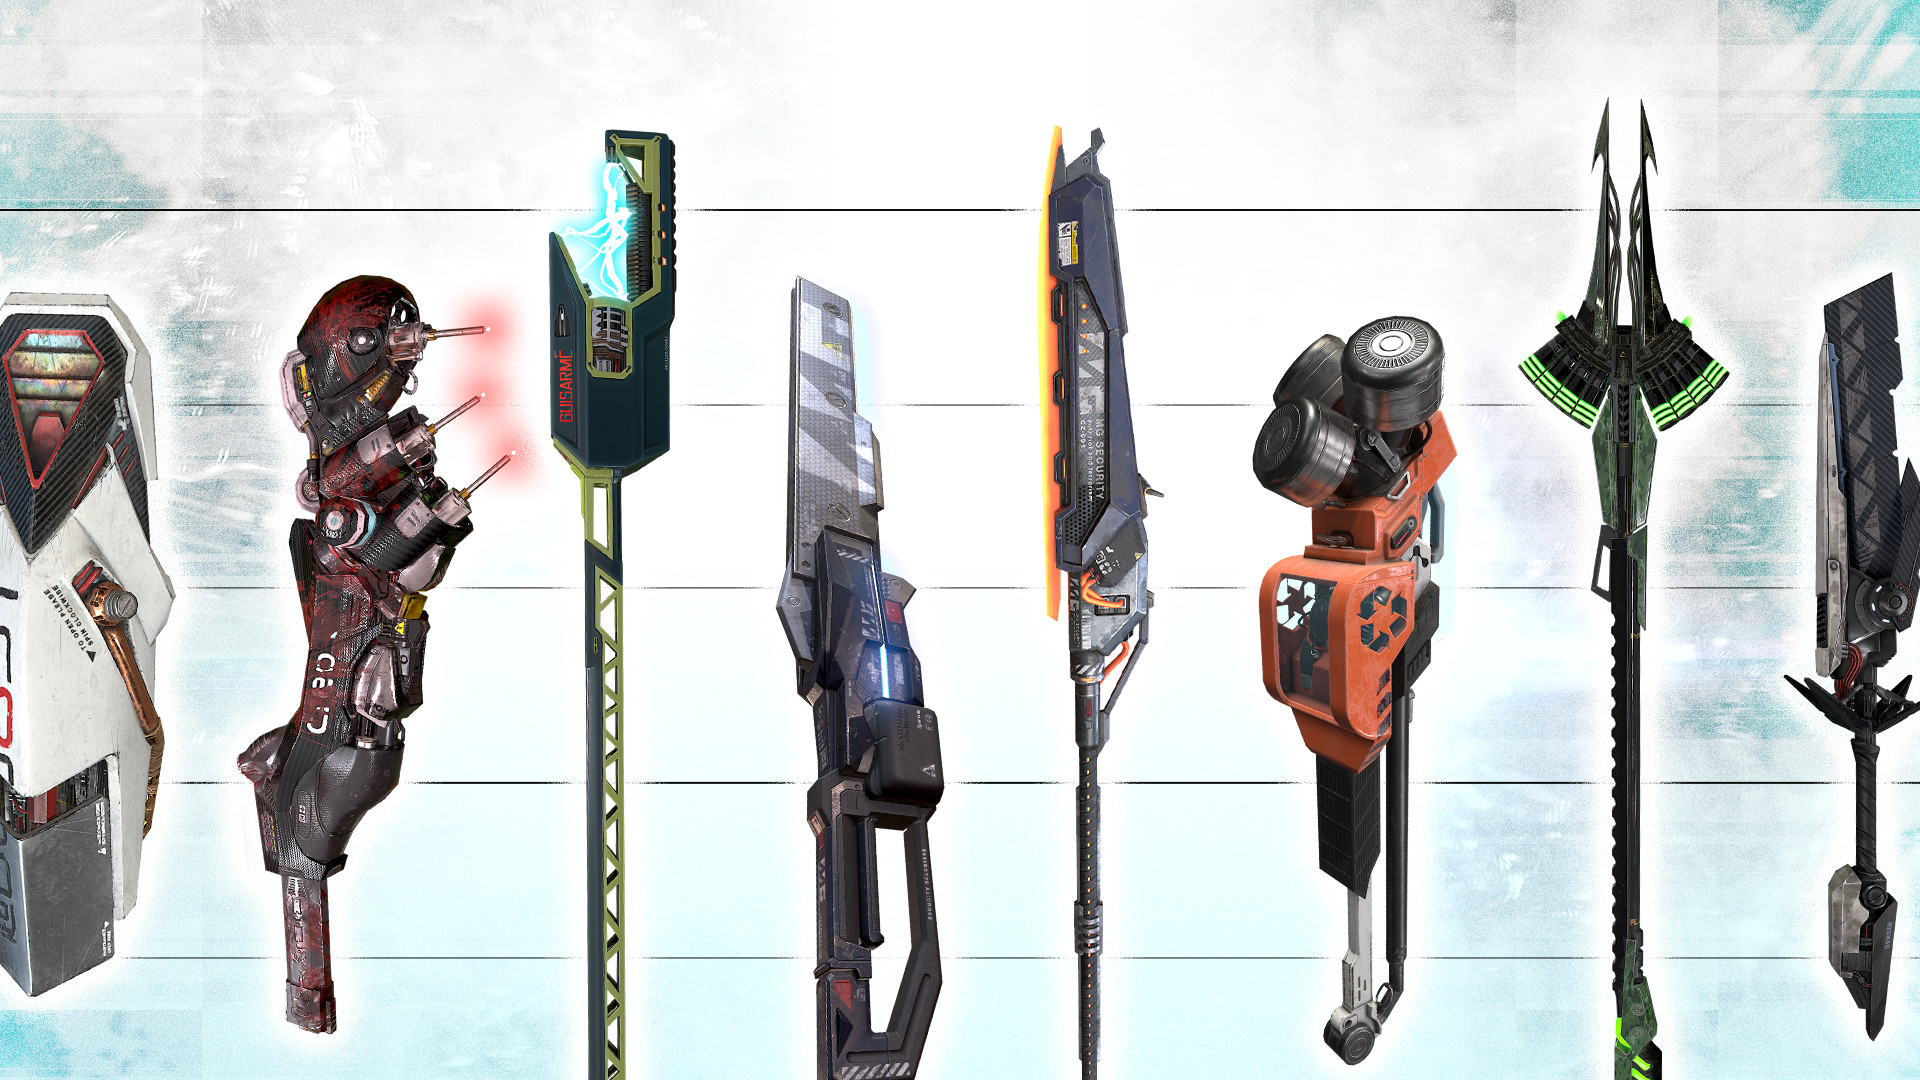 The Surge 2 - Public Enemy Weapon Pack Featured Screenshot #1